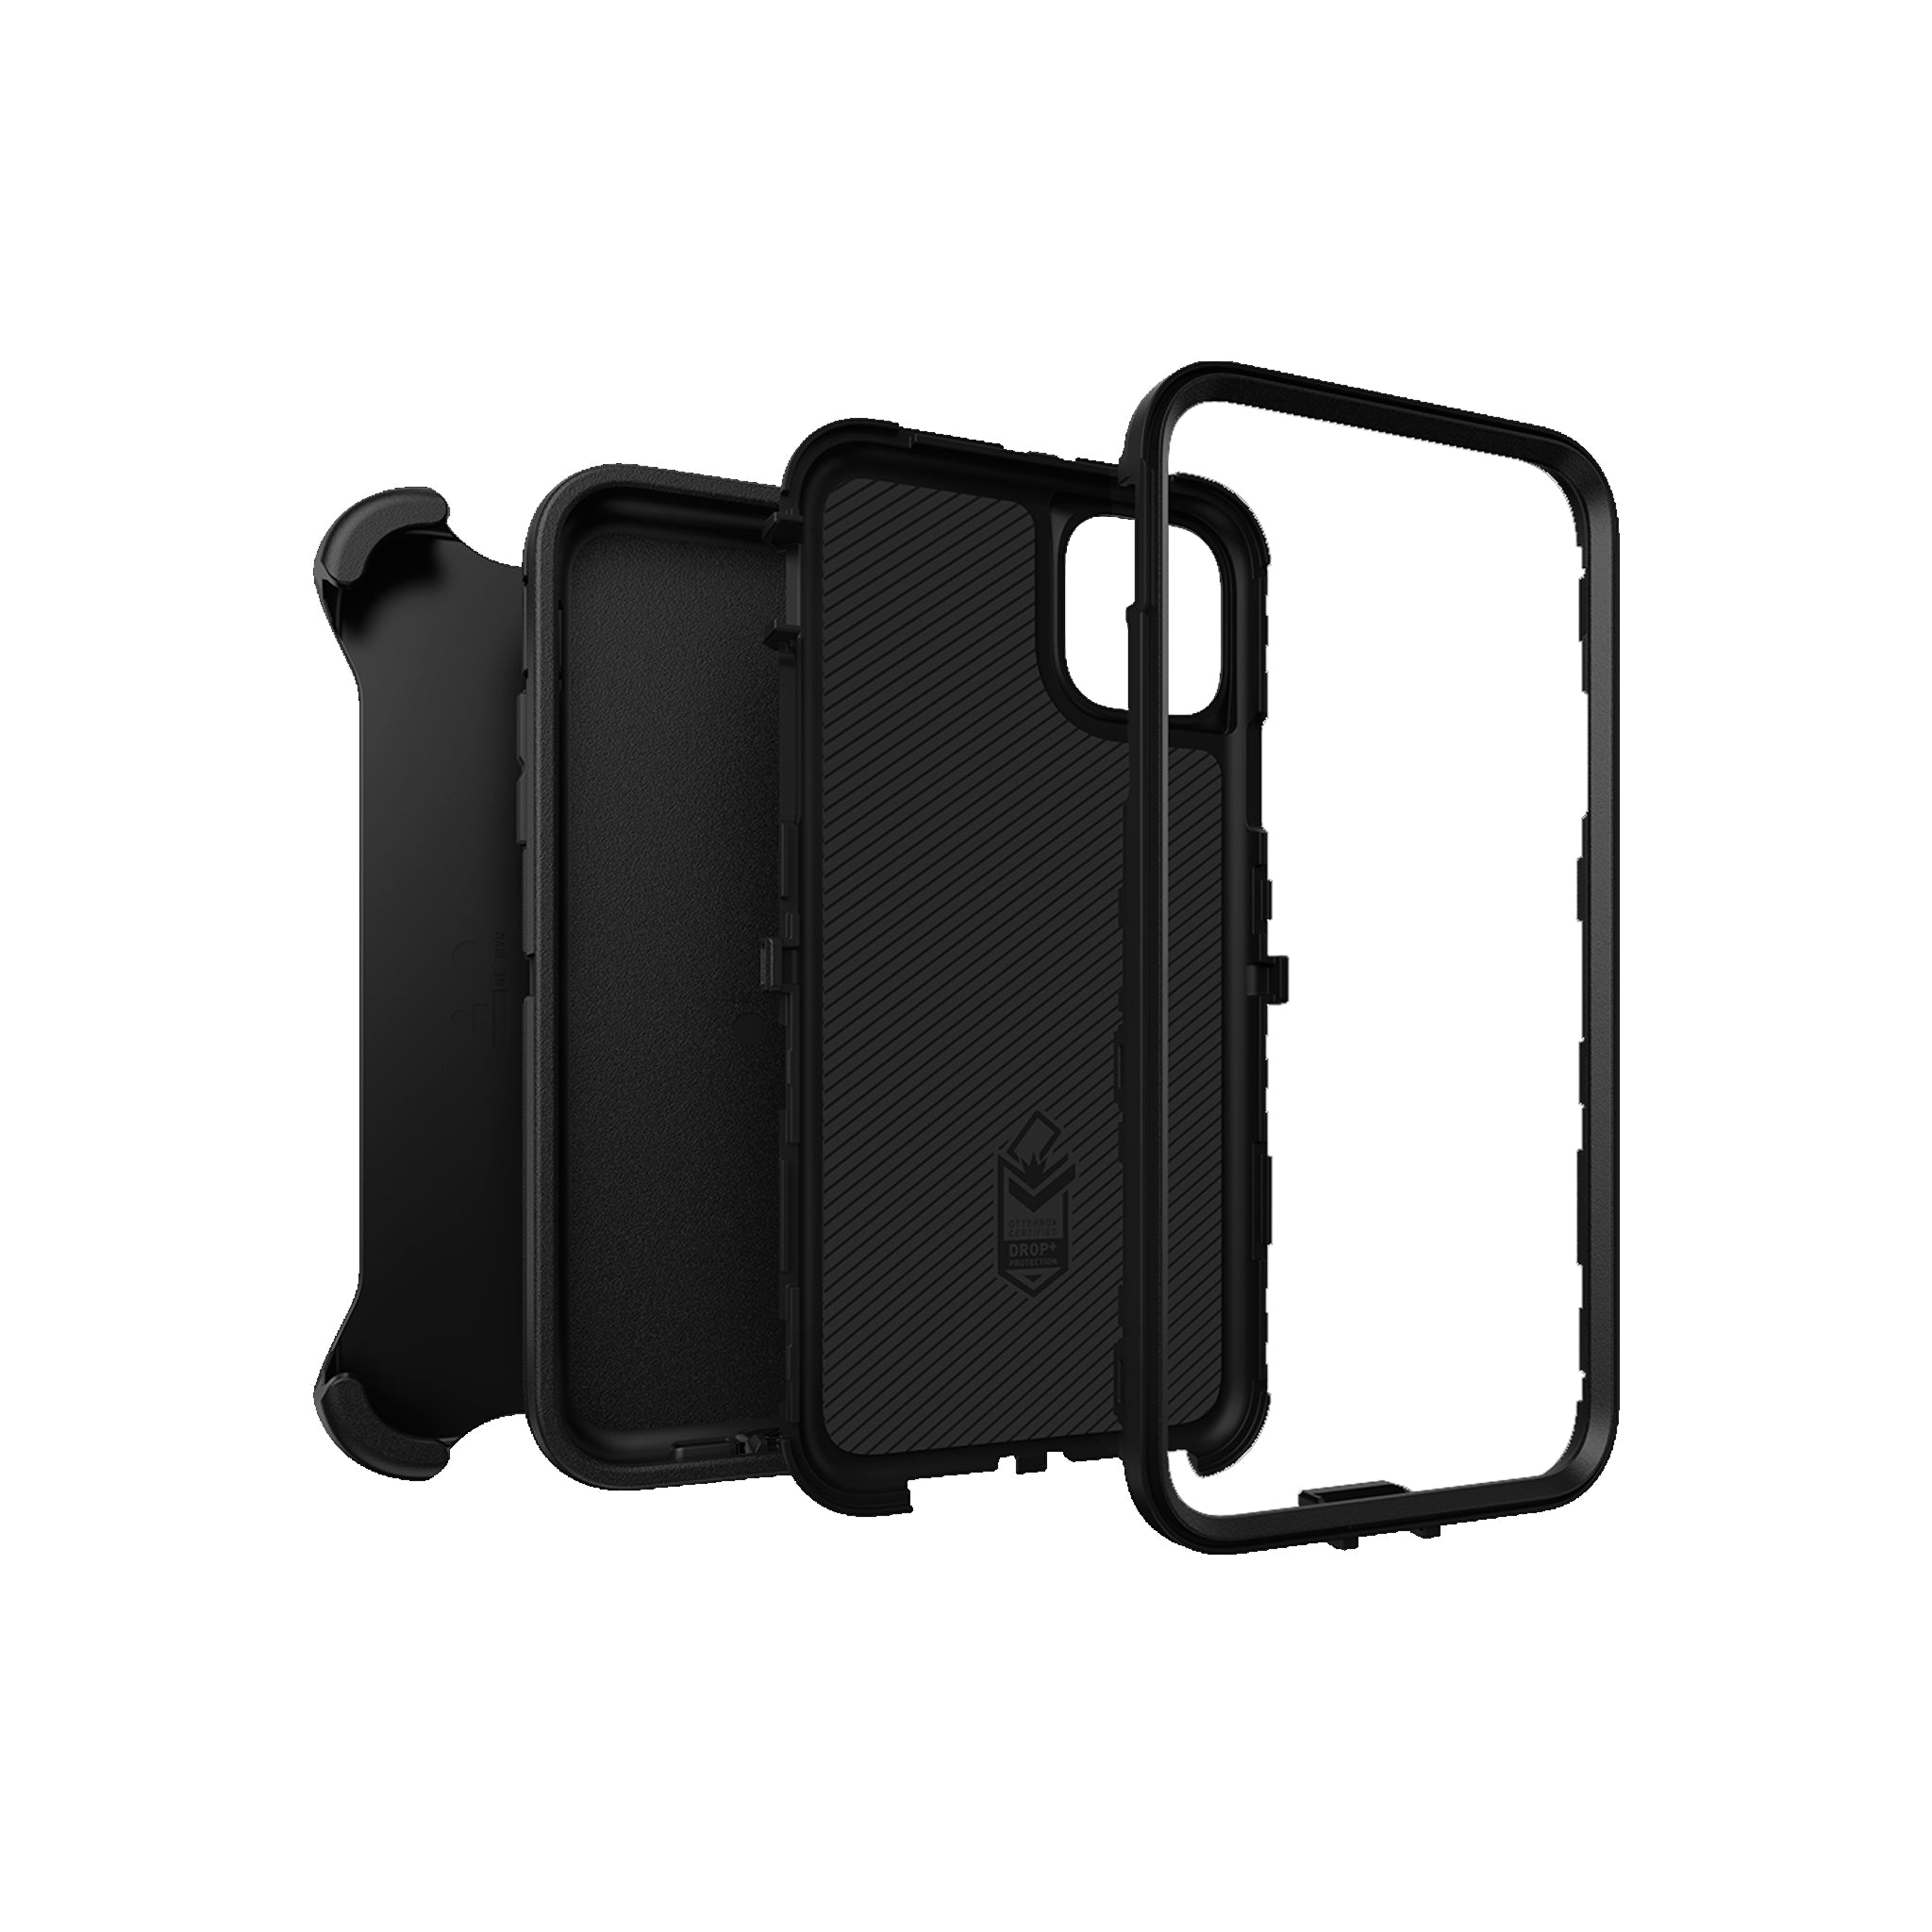 OtterBox - Defender Series Screenless Edition Case for iPhone 11 Pro Max - Black